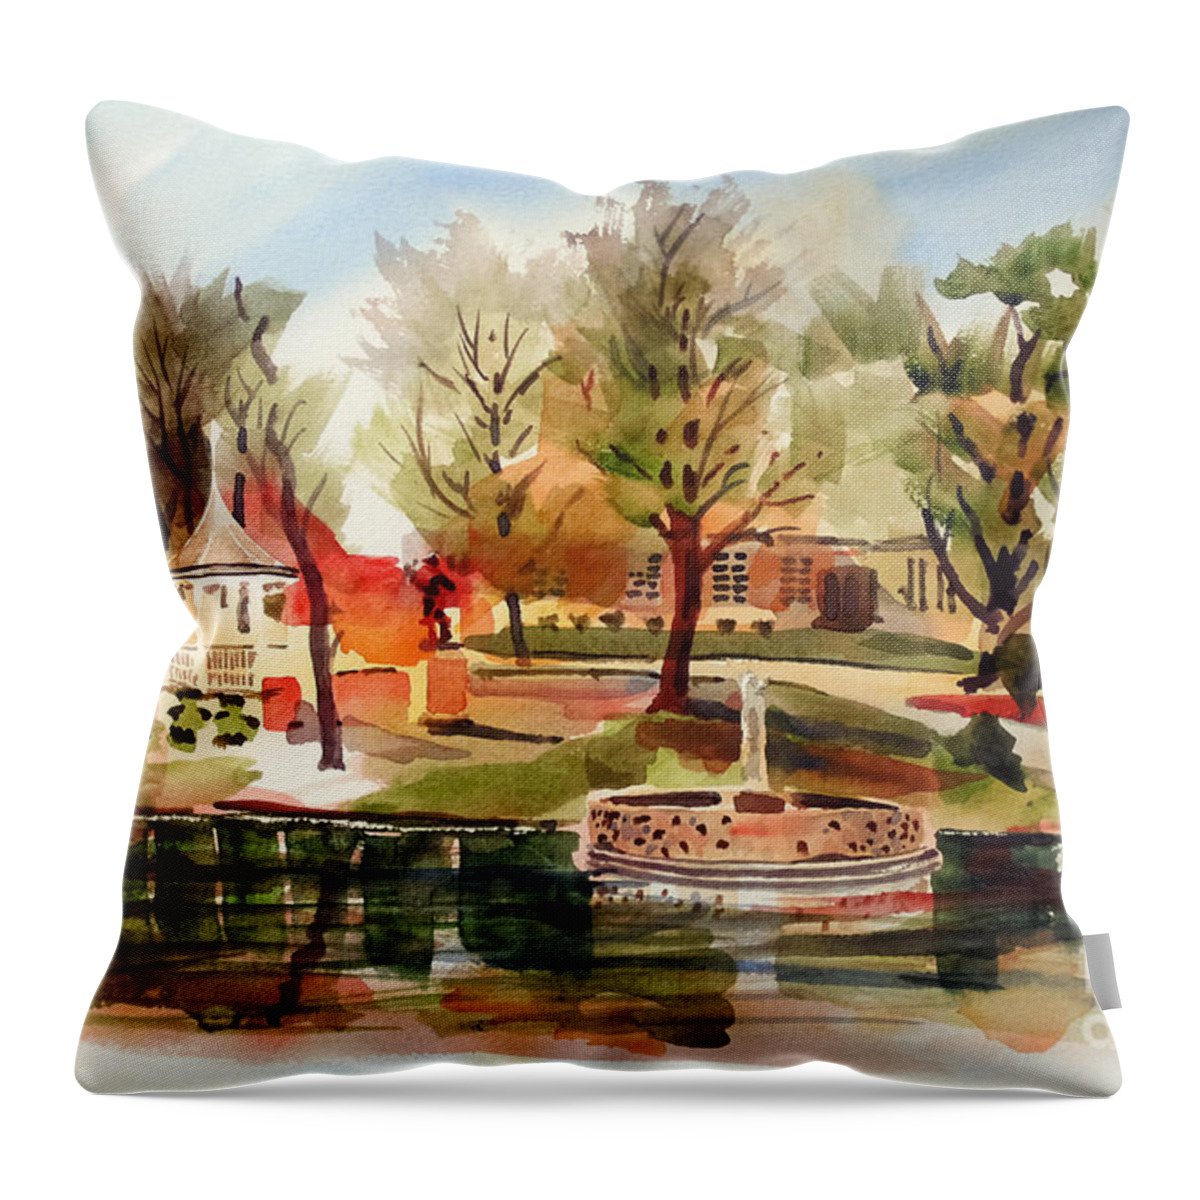 Ste. Marie Du Lac With Gazebo And Pond I Throw Pillow featuring the painting Ste. Marie du Lac with Gazebo and Pond I by Kip DeVore